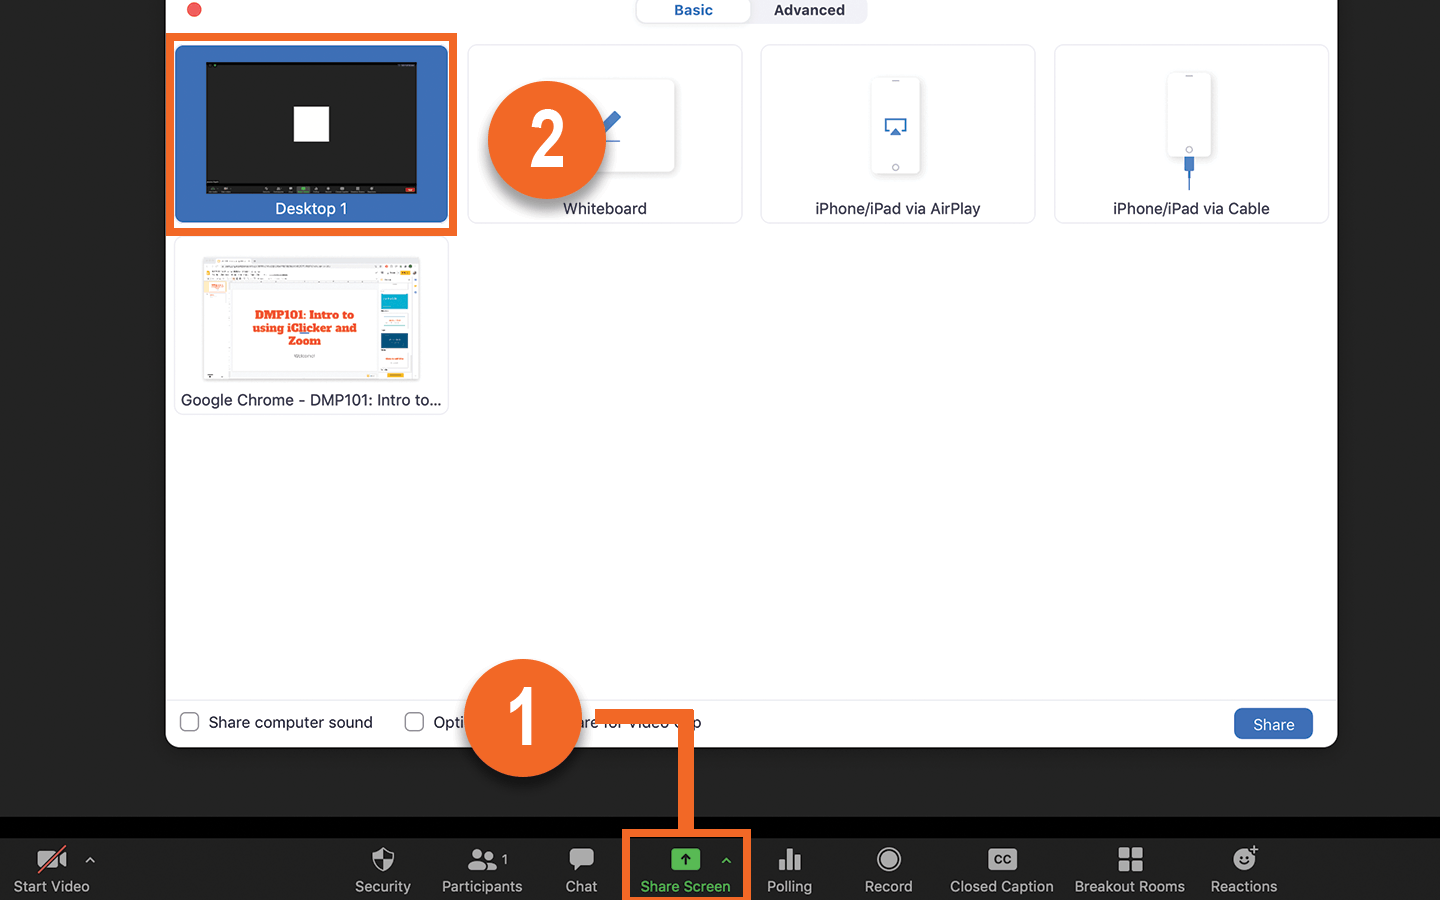 Sharing your screen and selecting the desktop view